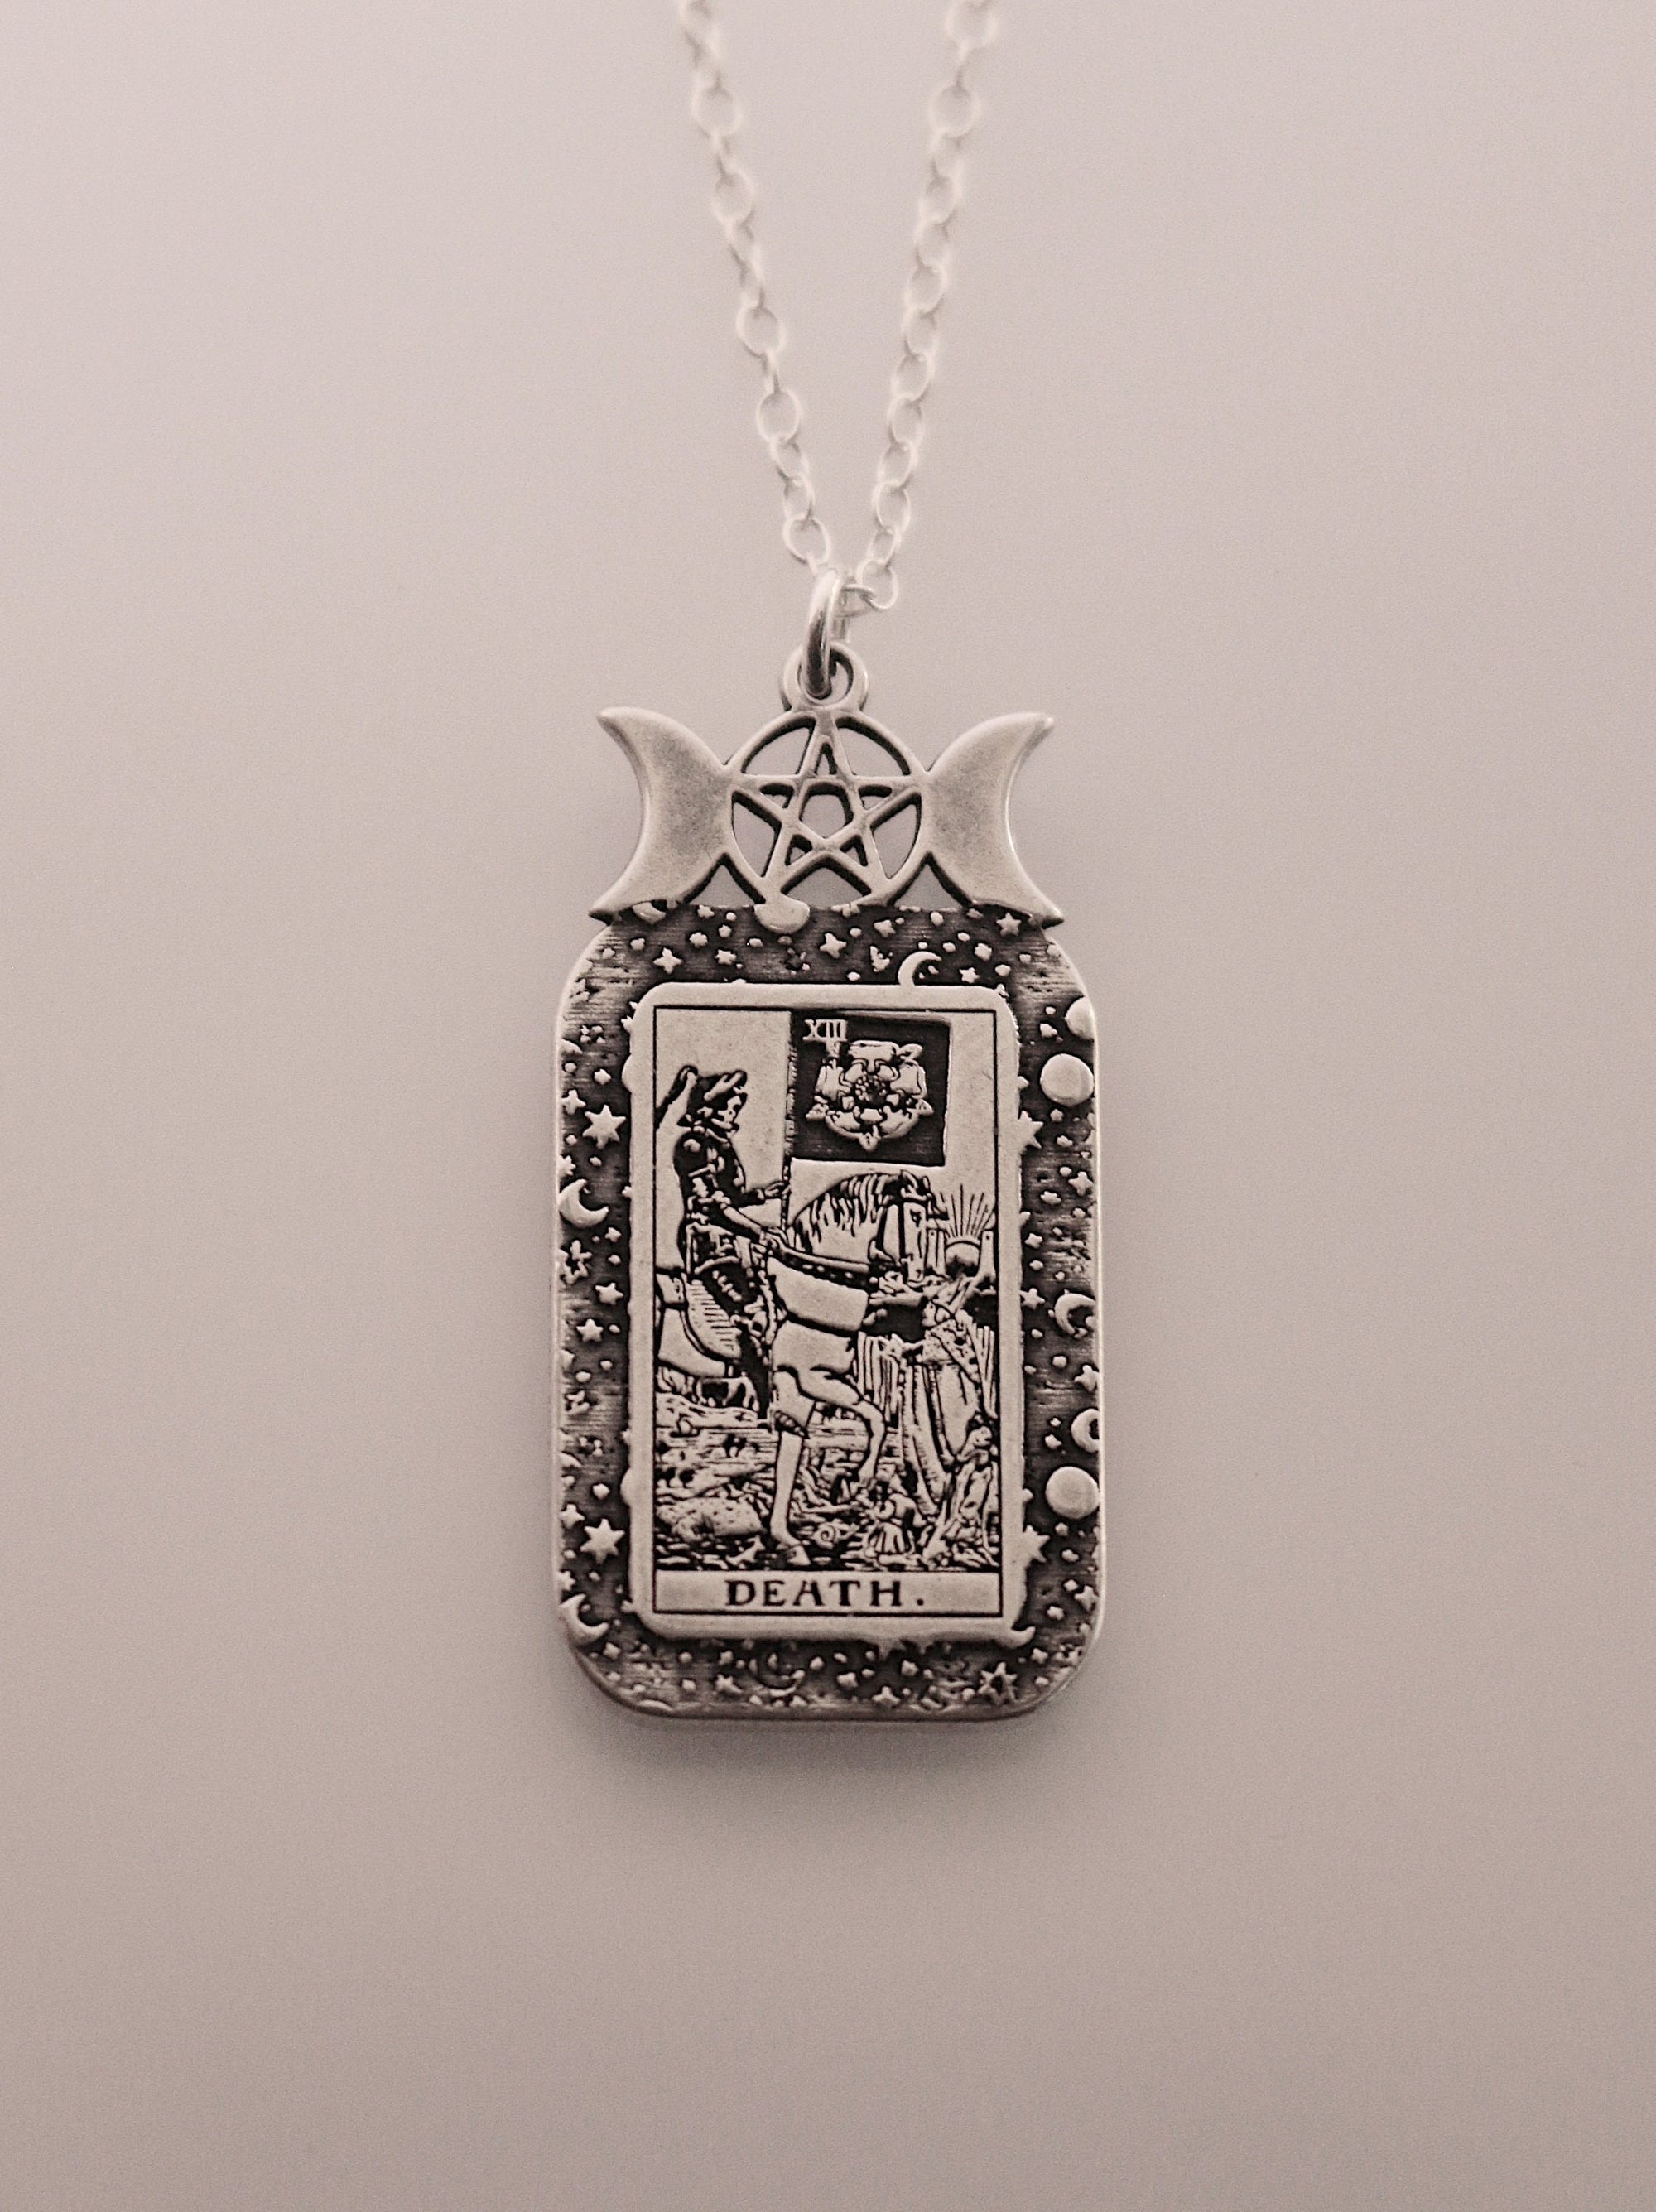 Death Tarot Card Necklace | Best Friend Birthday Gift | Tarot Card Necklace | Celestial Triple Moon Goddess Jewelry | Witch Necklace